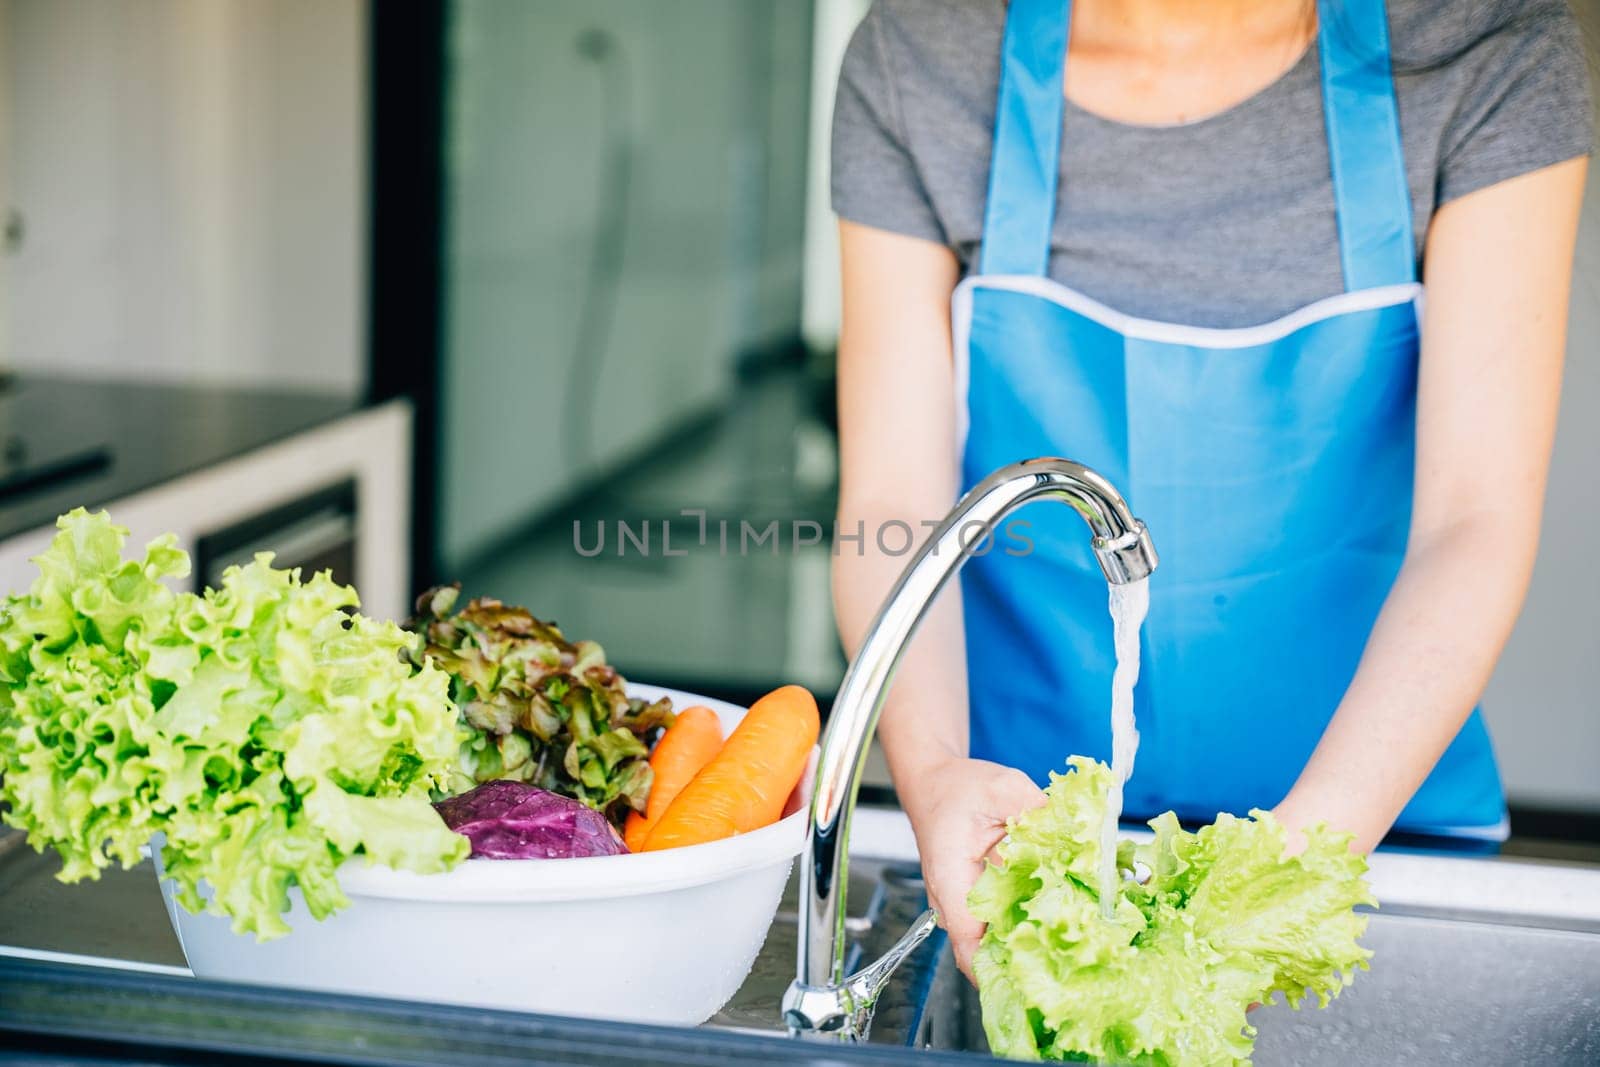 A joyful woman washes and prepares fresh vegetables in her kitchen sink for a vibrant salad enjoying her vegetarian lifestyle with healthy clean eating habits at home.